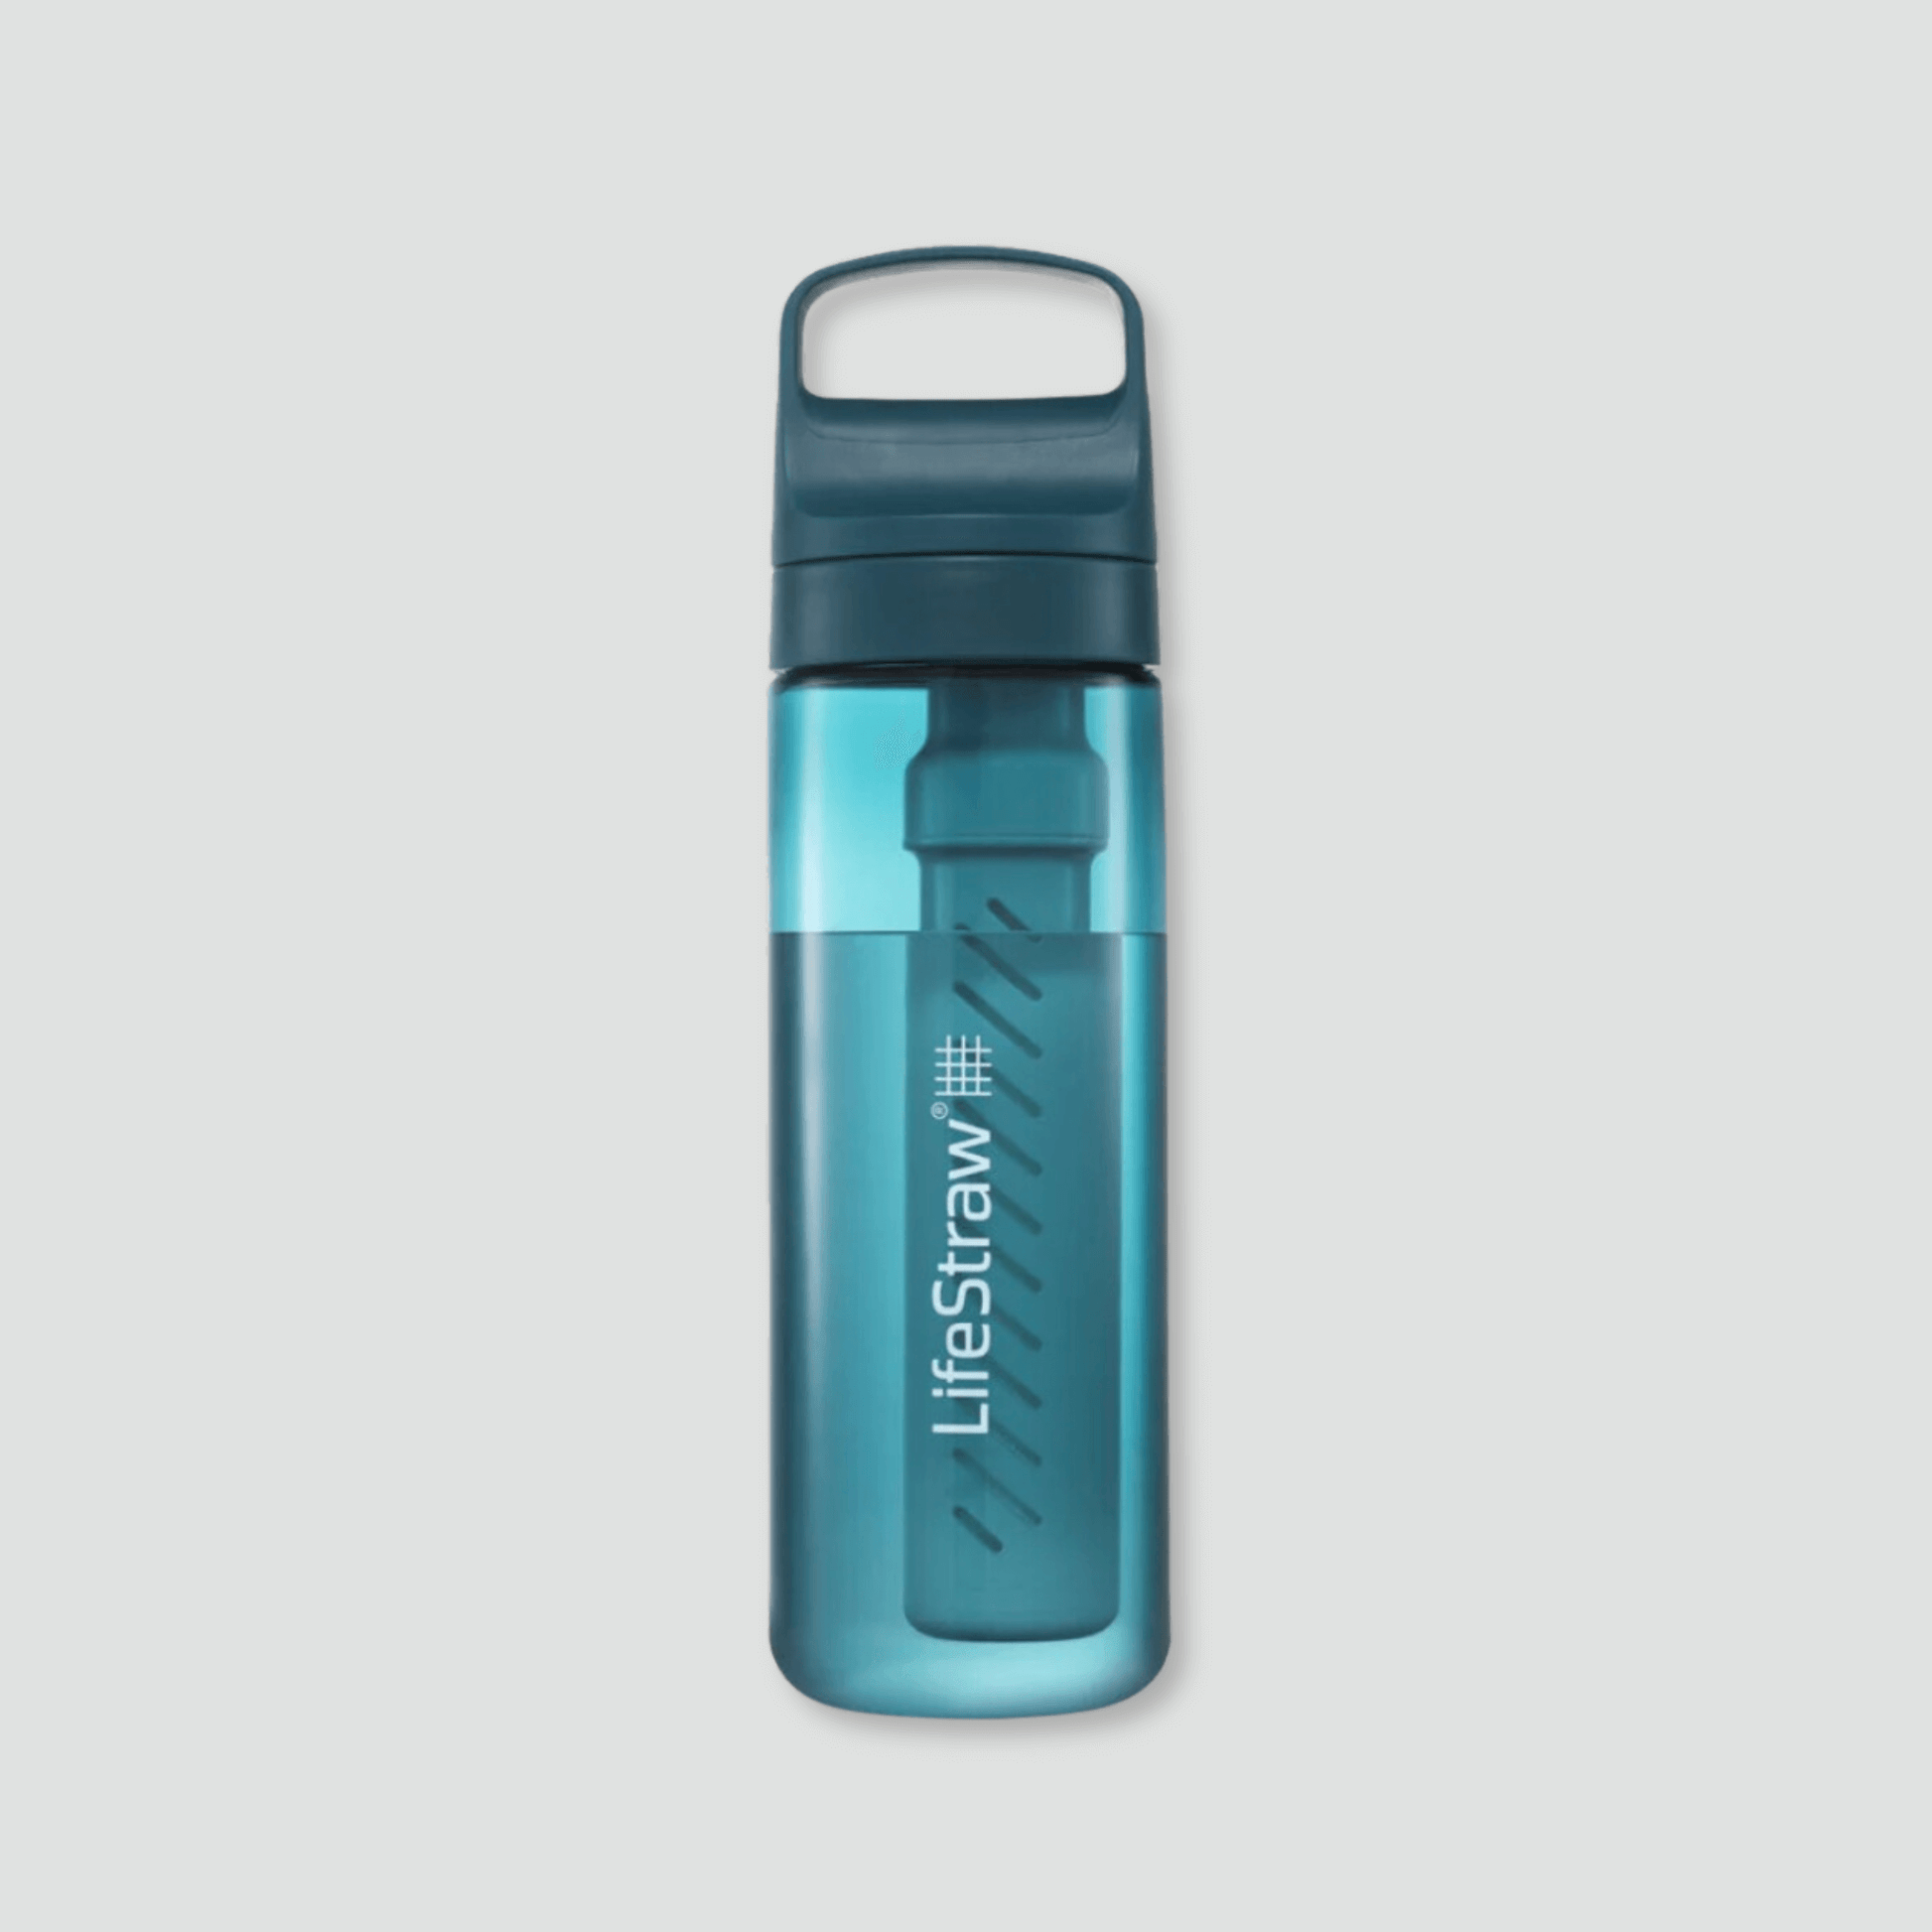 22oz LifeStraw Go Water Bottle with filter in teal.